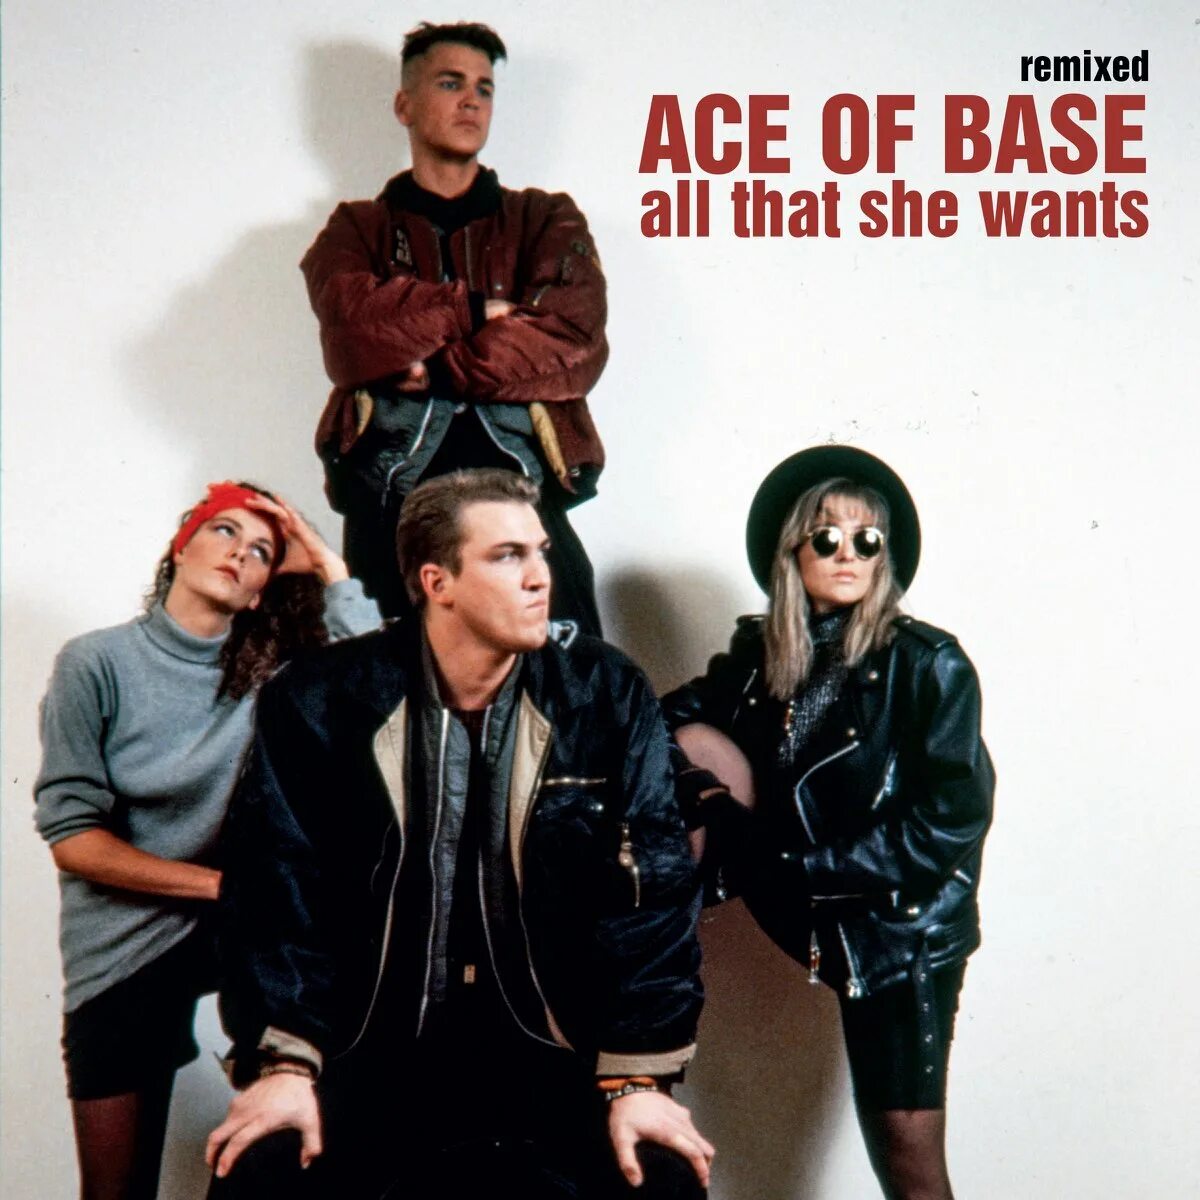 She wants ready. Ace of Base all that she wants обложка. Ace of Base all that she wants альбом. Ace of Base Ace of Base - all that she wants. Ace of Base обложки альбомов.